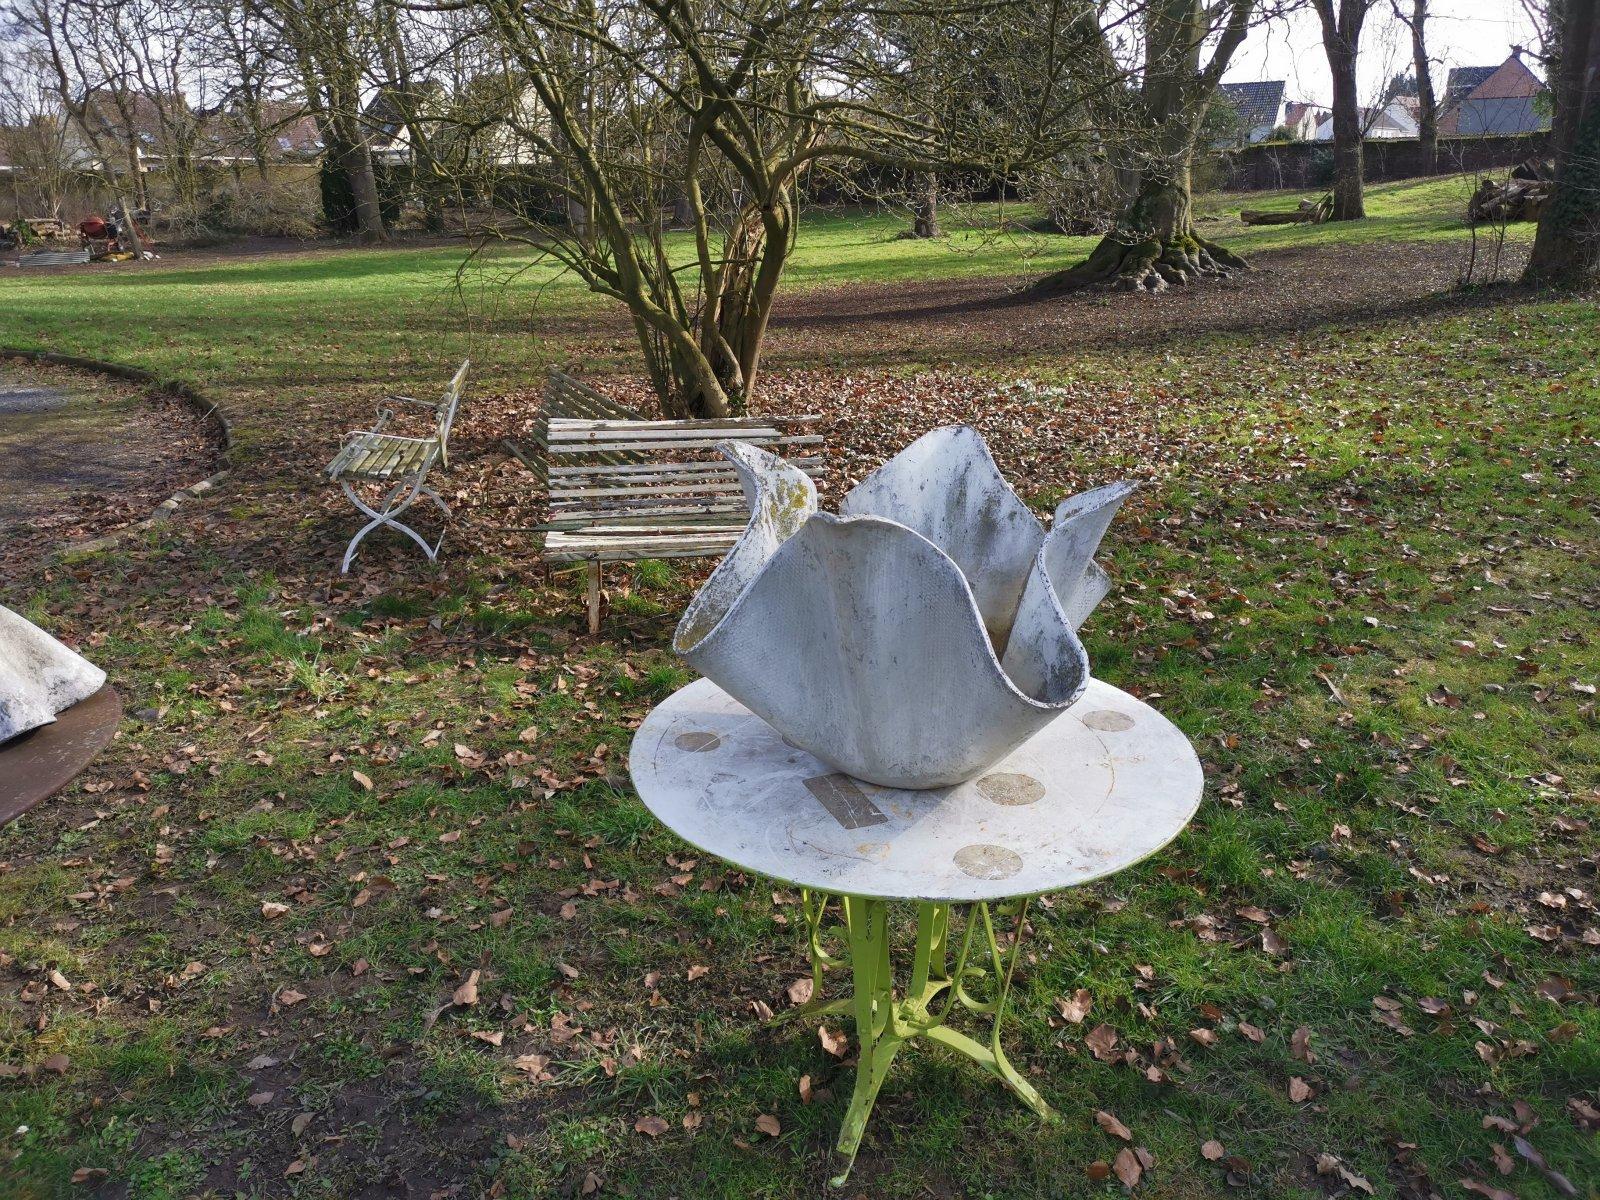 Willy Guhl for Eternit, a very rare 21 inch tall Mid-Century Modern sculptural concrete garden Handkerchief elephant ear planter. It looks like a large seed pod and will look very special once planted up.
In wonderful honest original condition, all